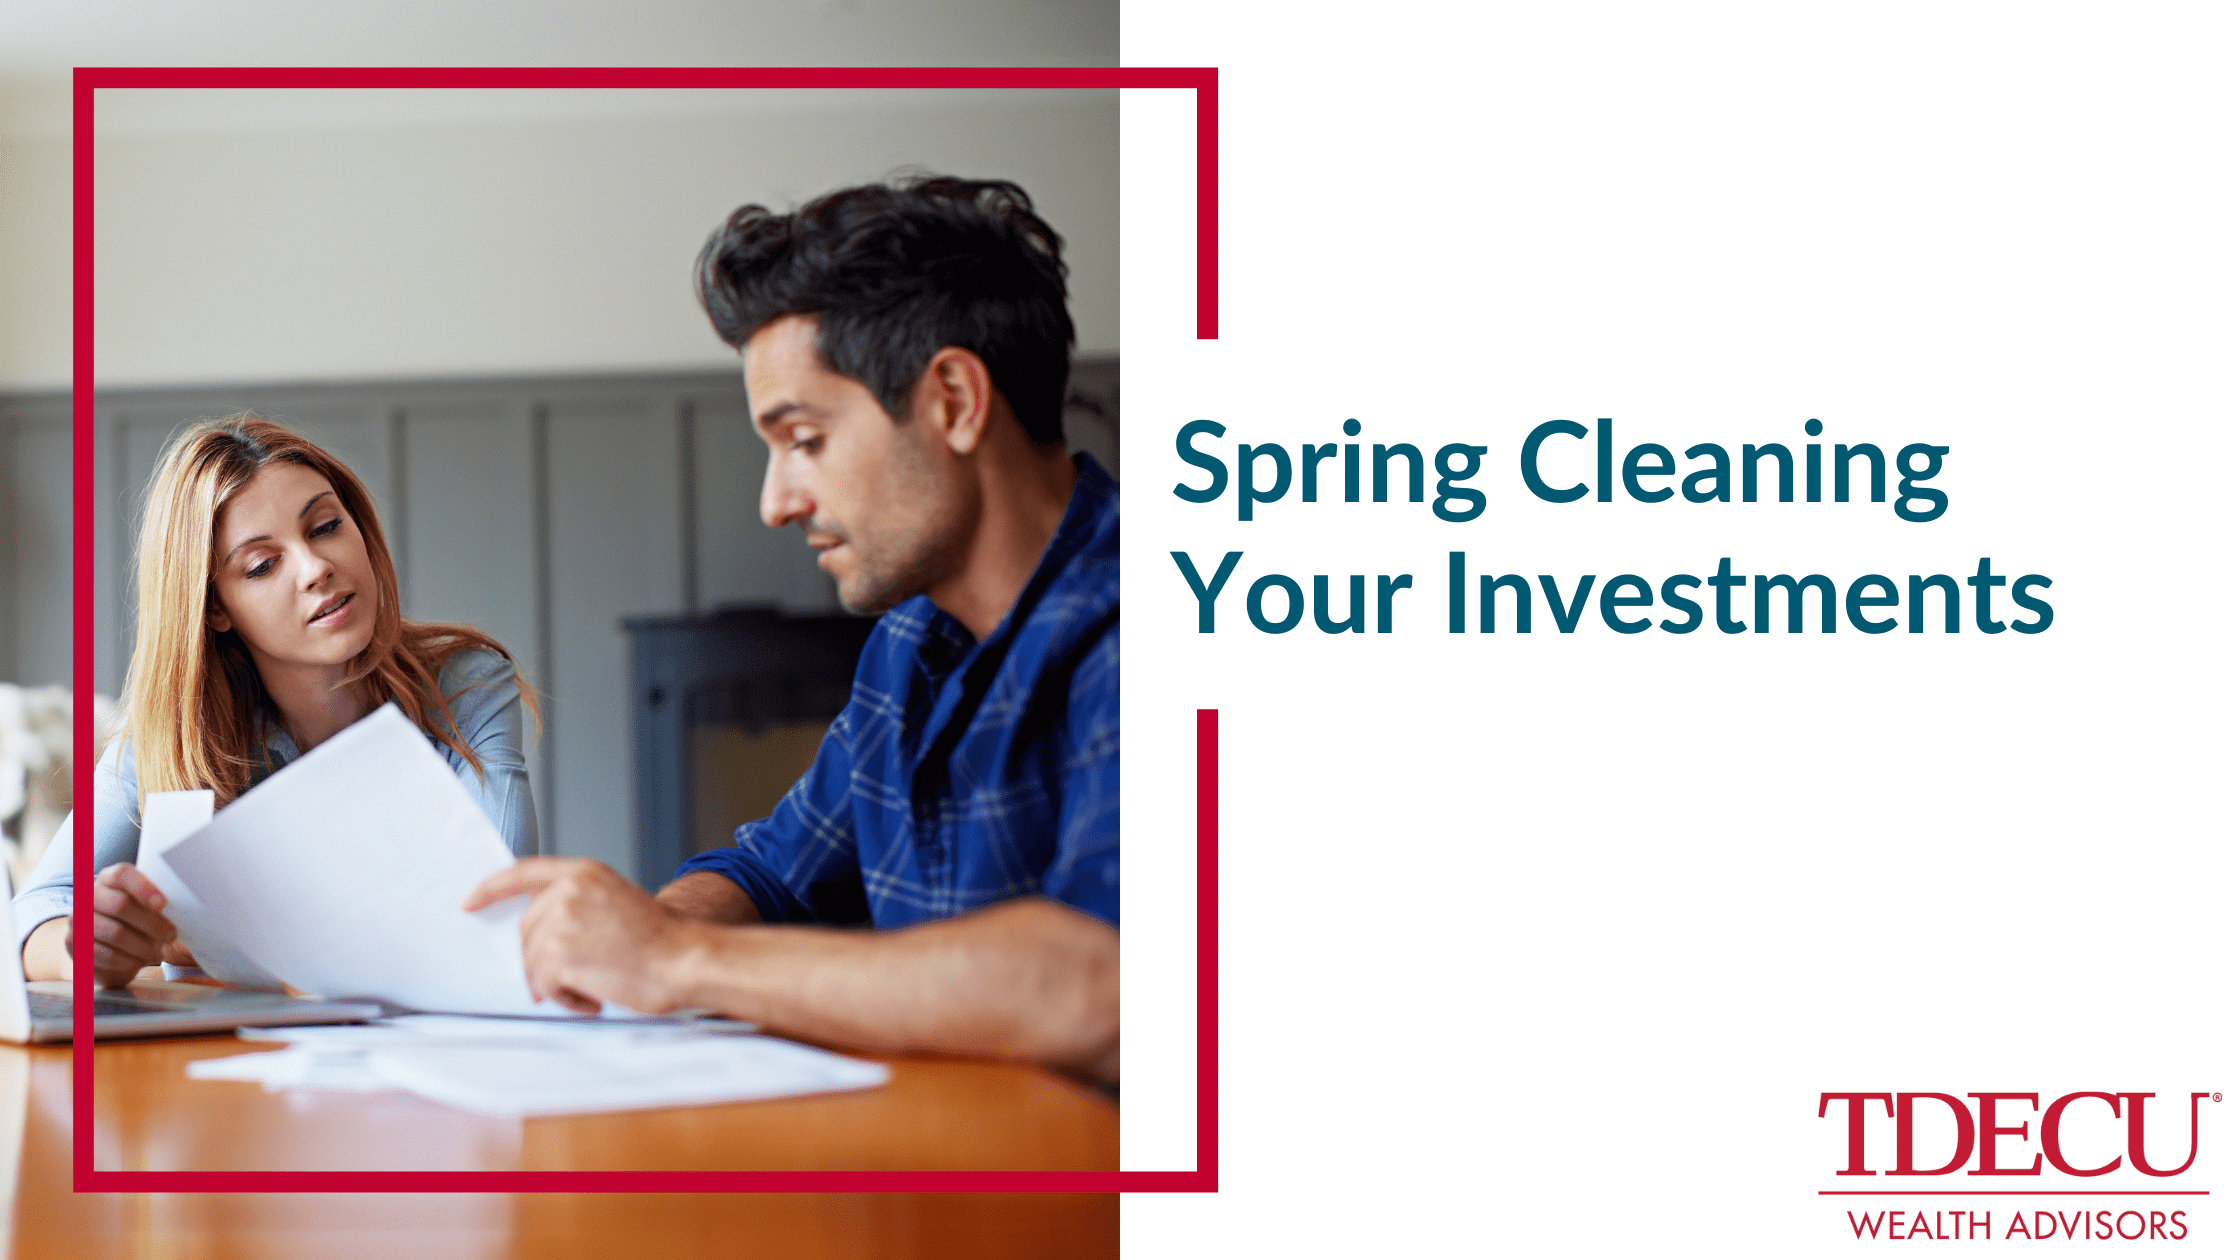 Spring Cleaning Your Investments